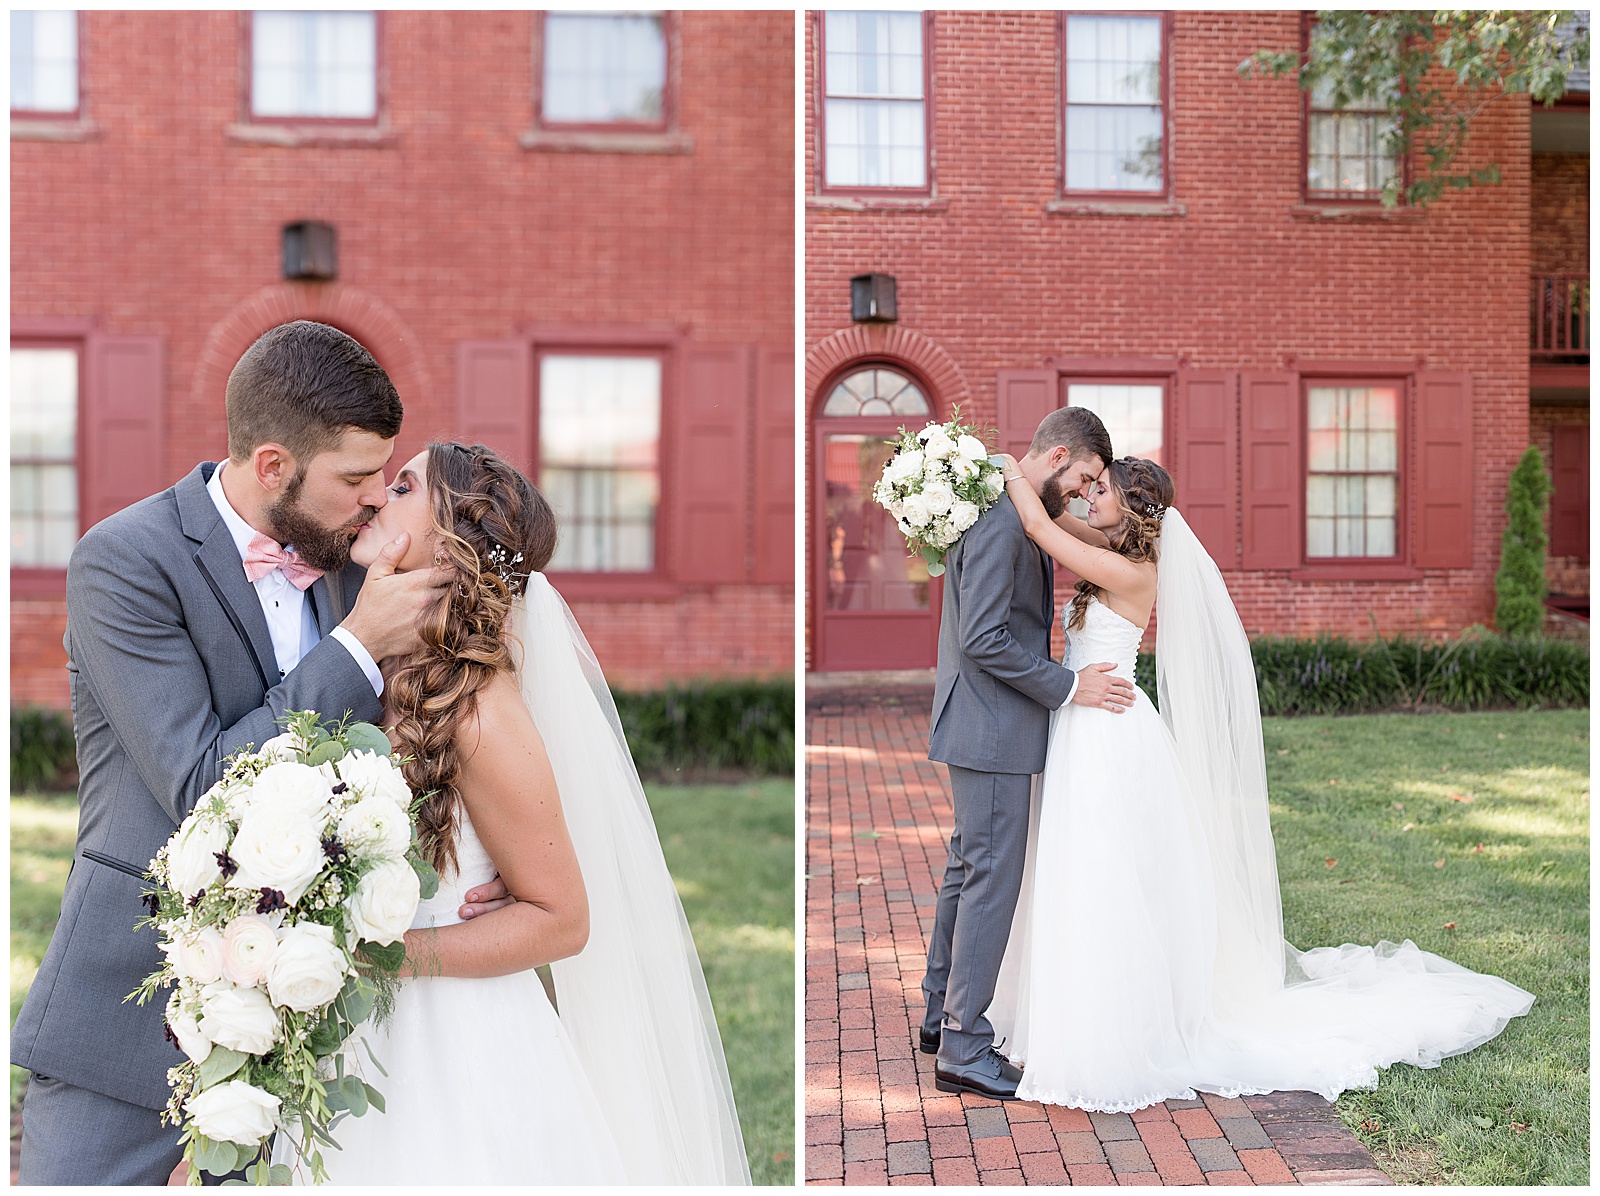 bride and groom portraits in courtyard with red brick house behind at Country Barn